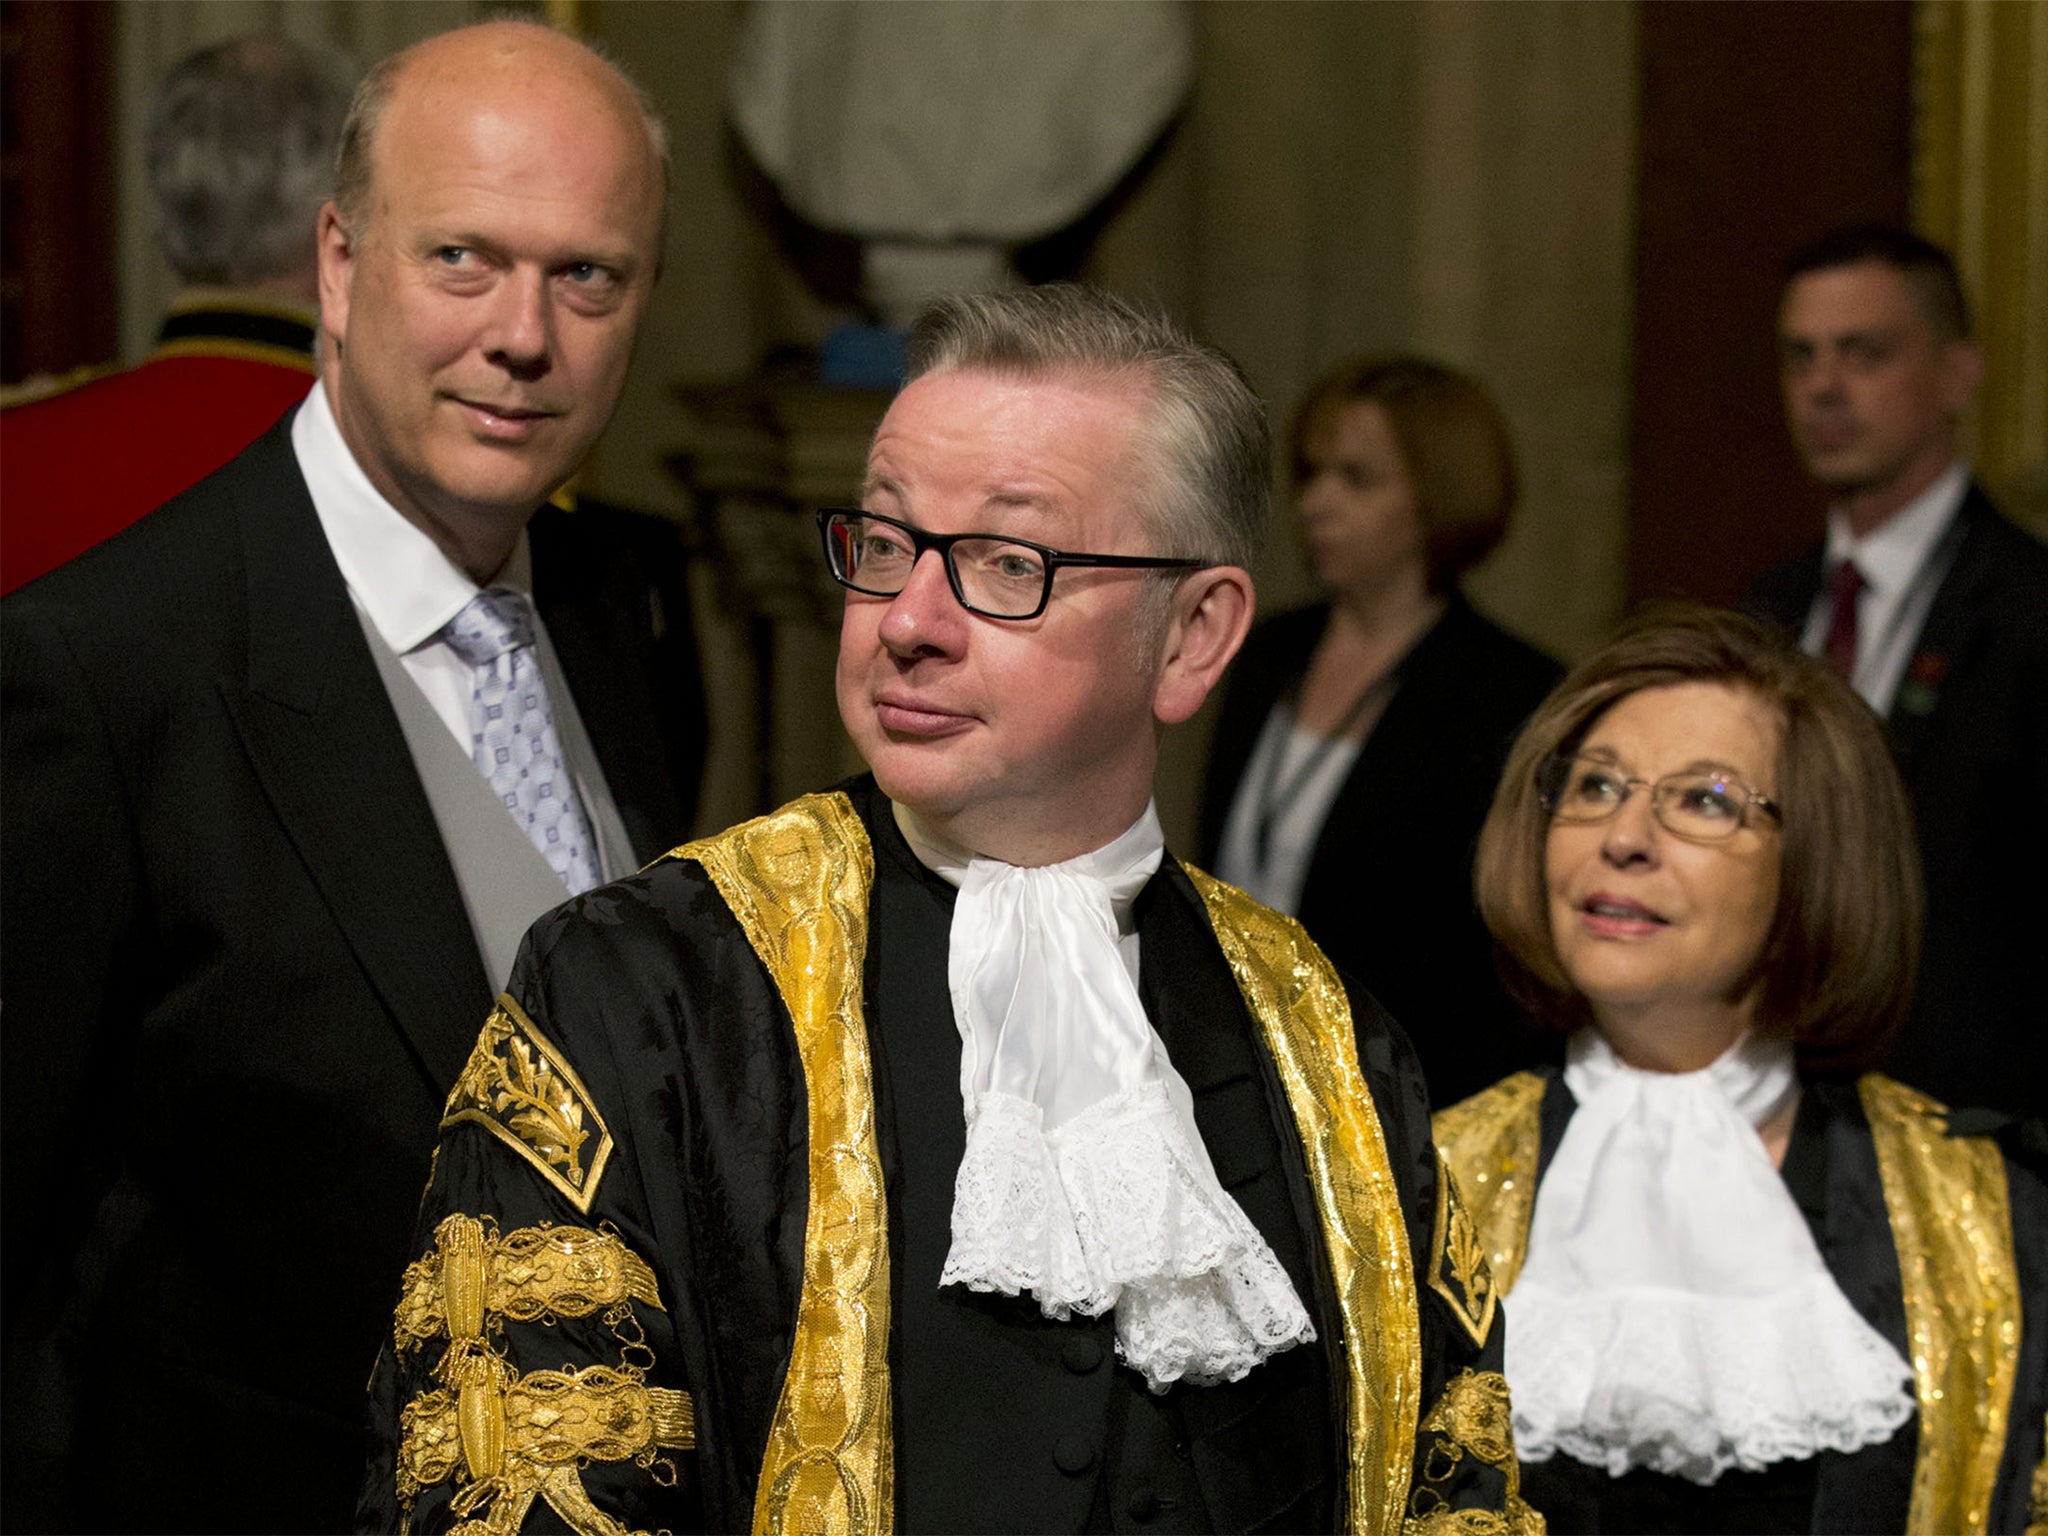 Govey, baby: The Justice Secretary (centre) looking like a 16 century Austin Powers at the House of Lords yesterday